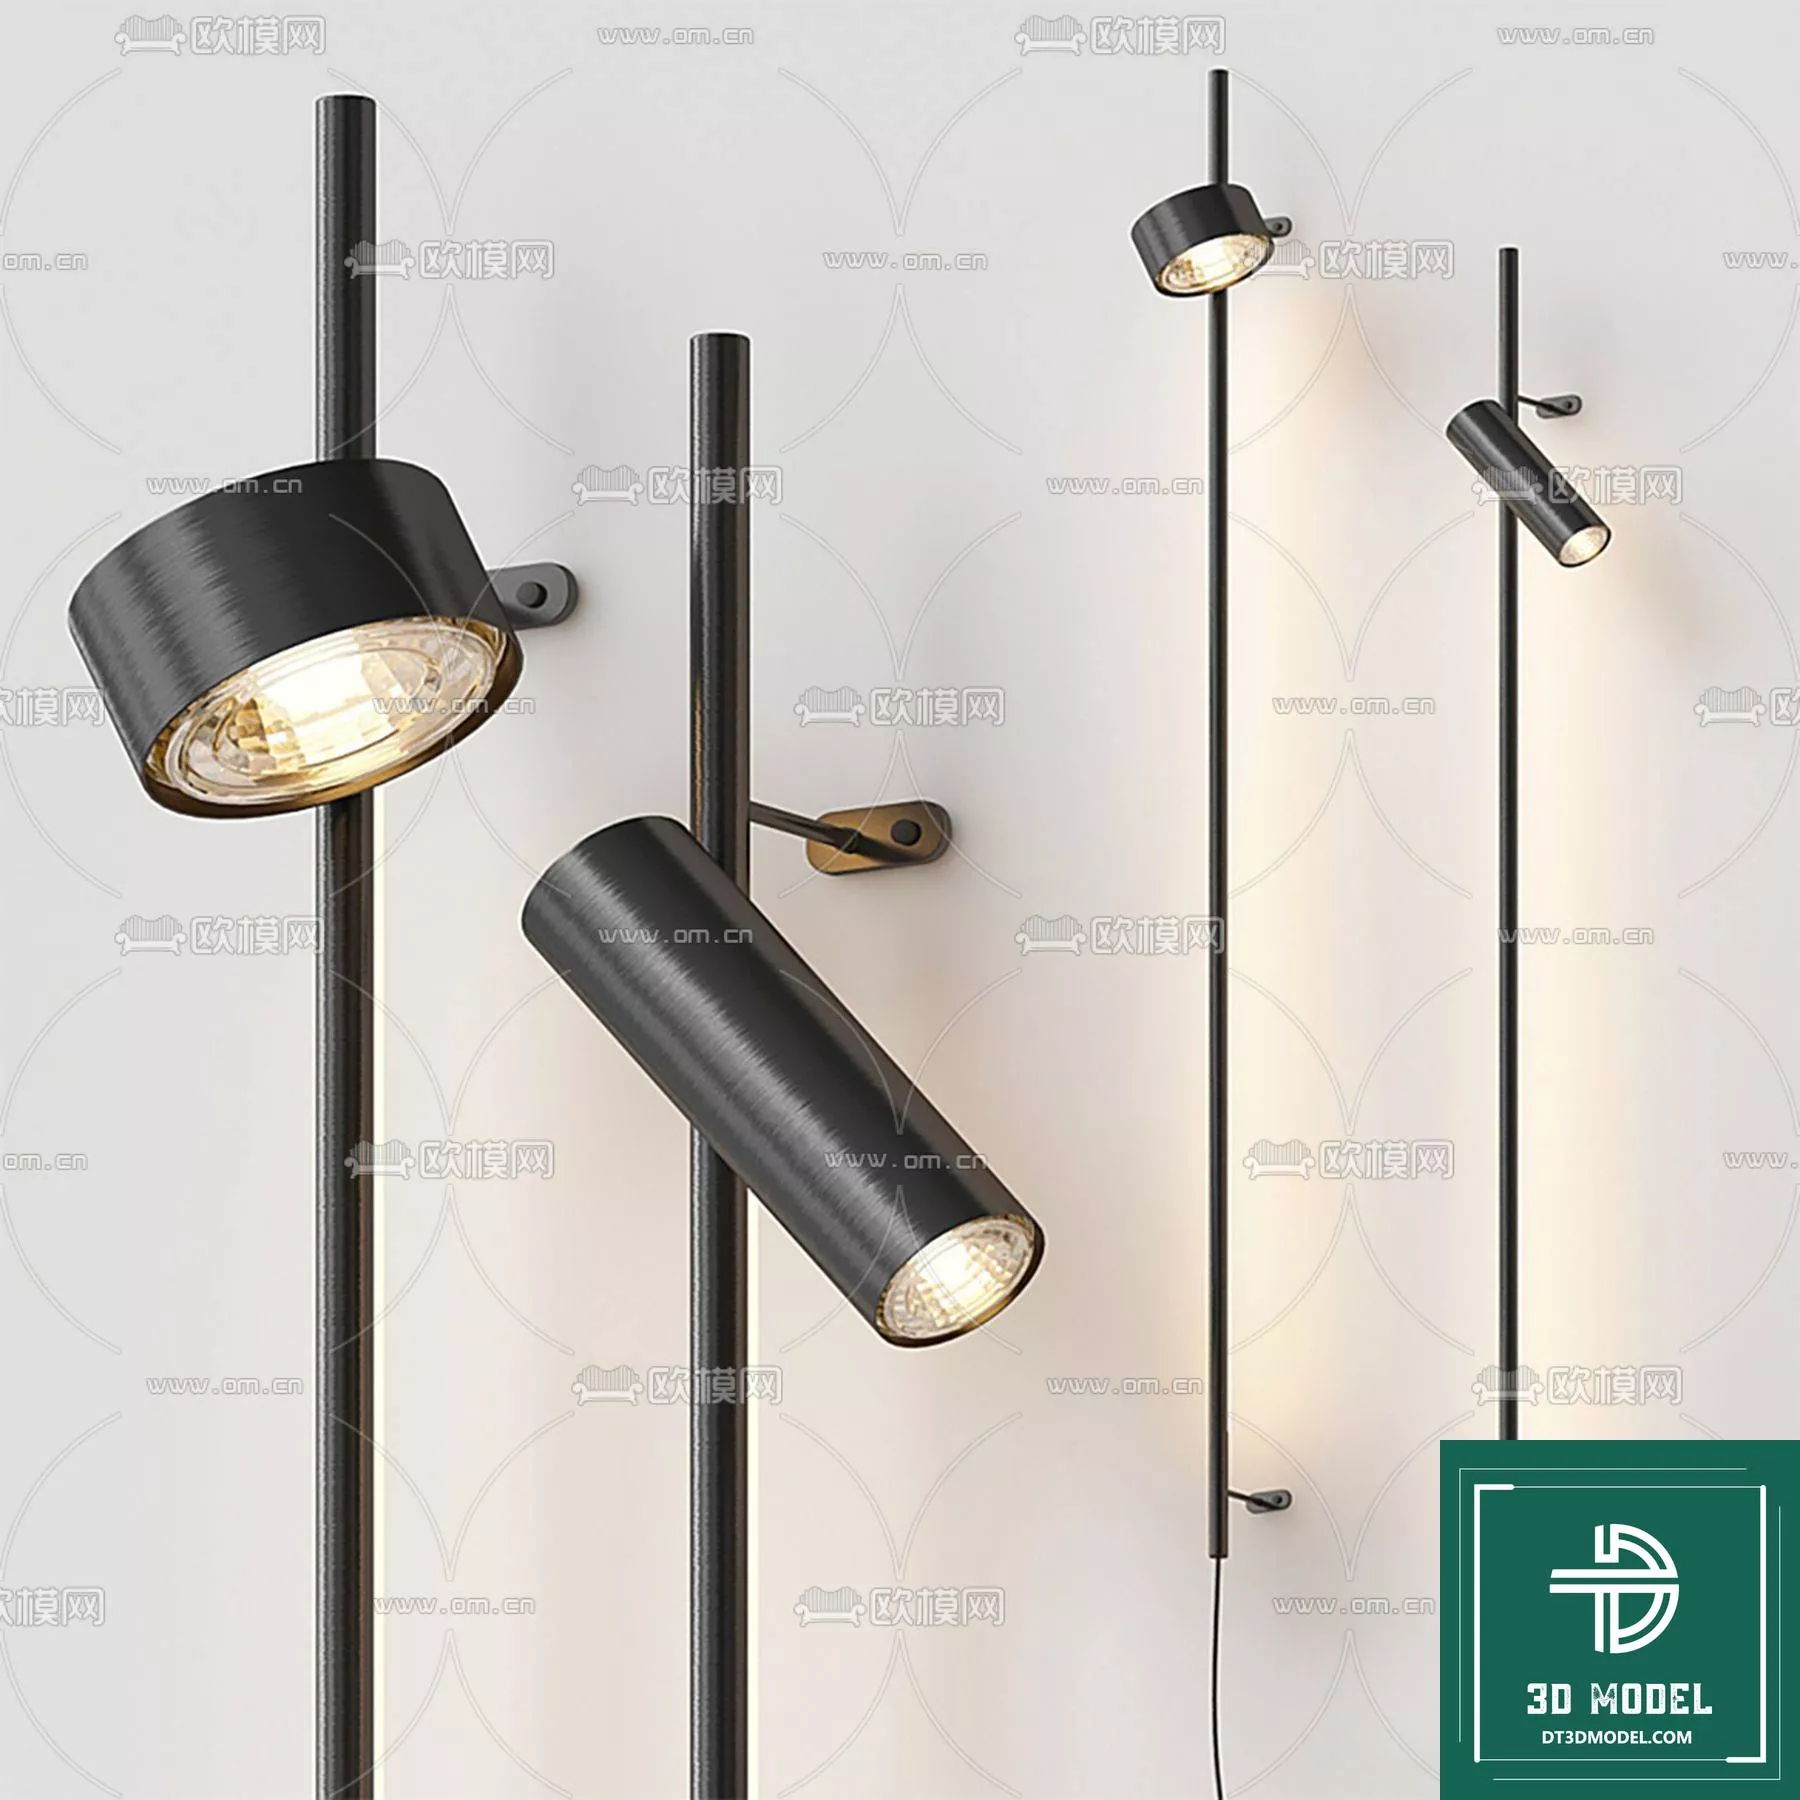 MODERN WALL LAMP - SKETCHUP 3D MODEL - VRAY OR ENSCAPE - ID16086